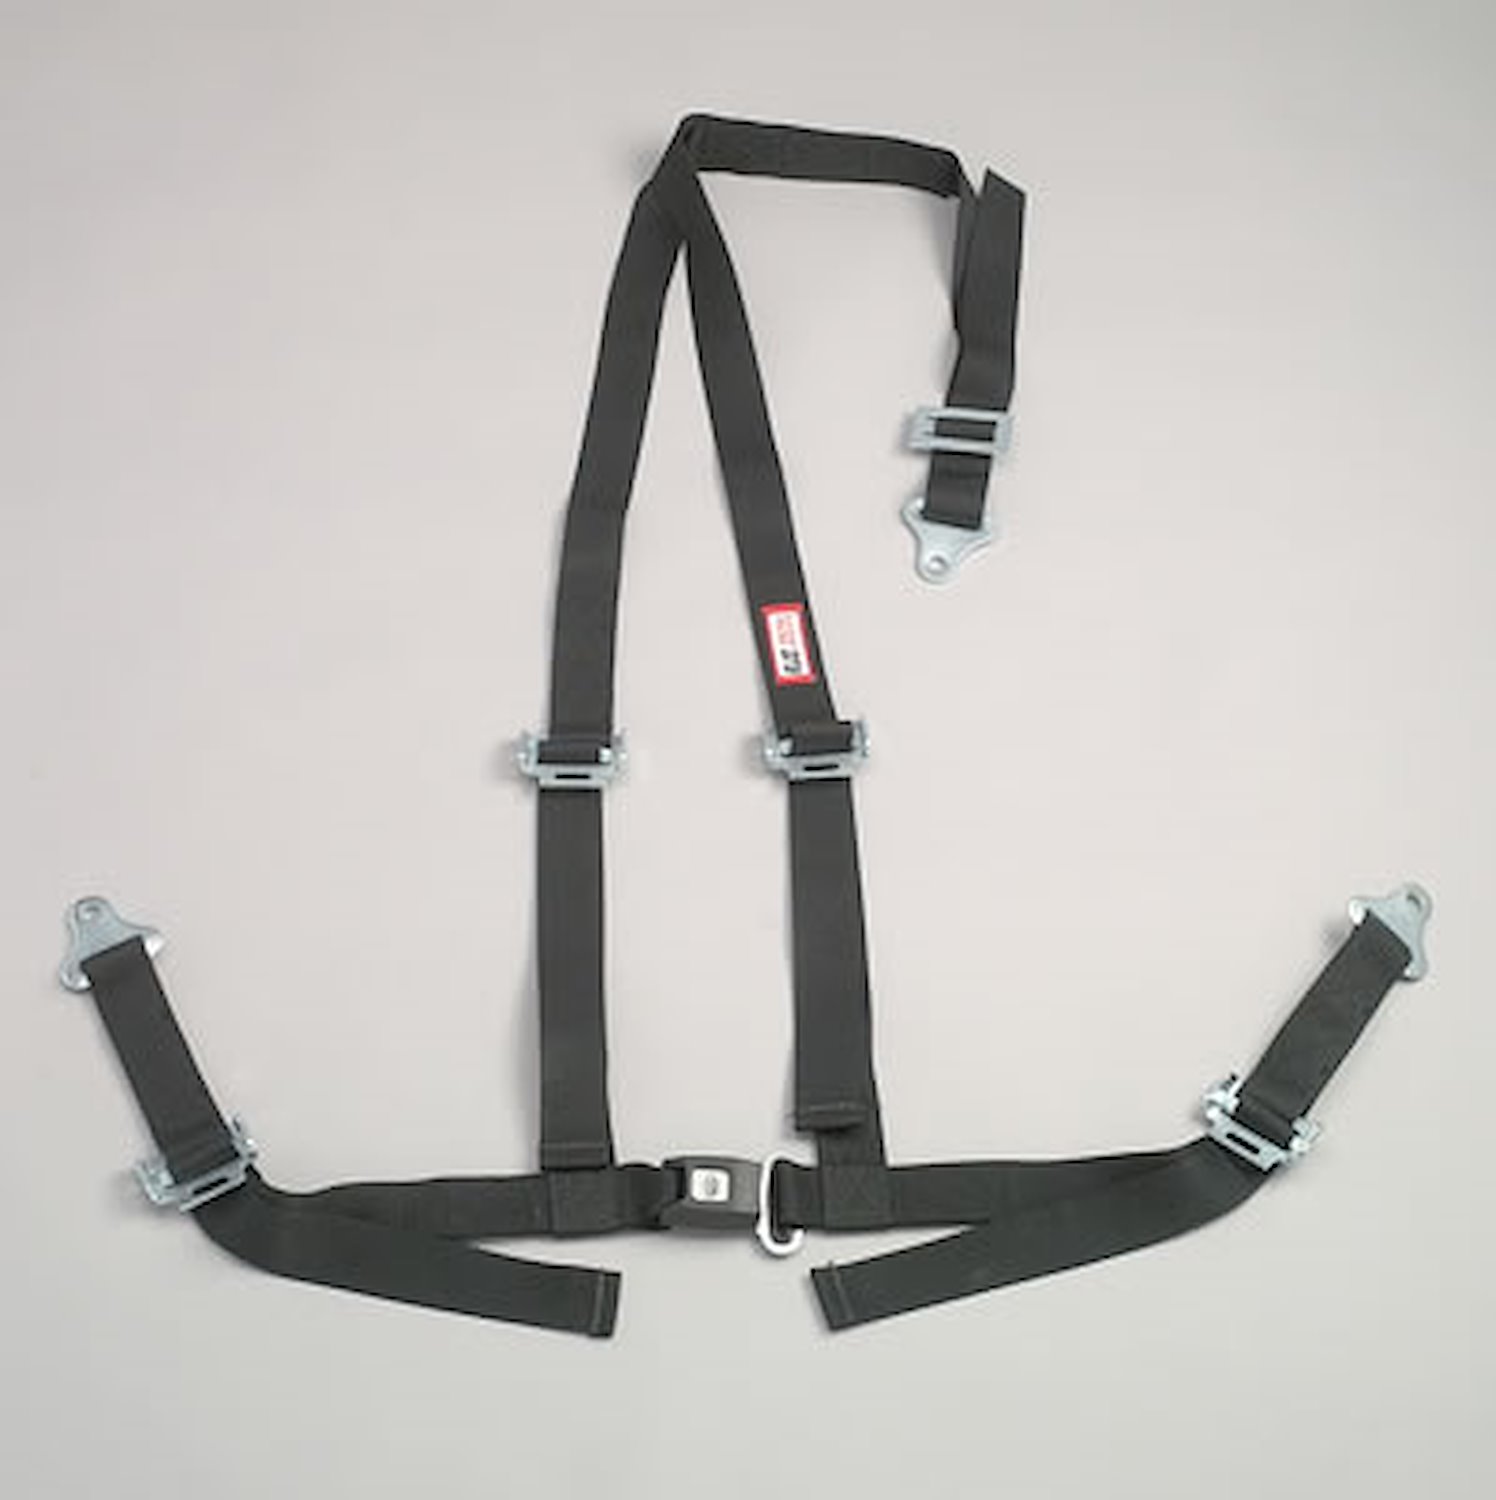 NON-SFI B&T HARNESS 2 PULL UP Lap Belt 2 S. H. V ROLL BAR Mount ALL SNAP ENDS RED